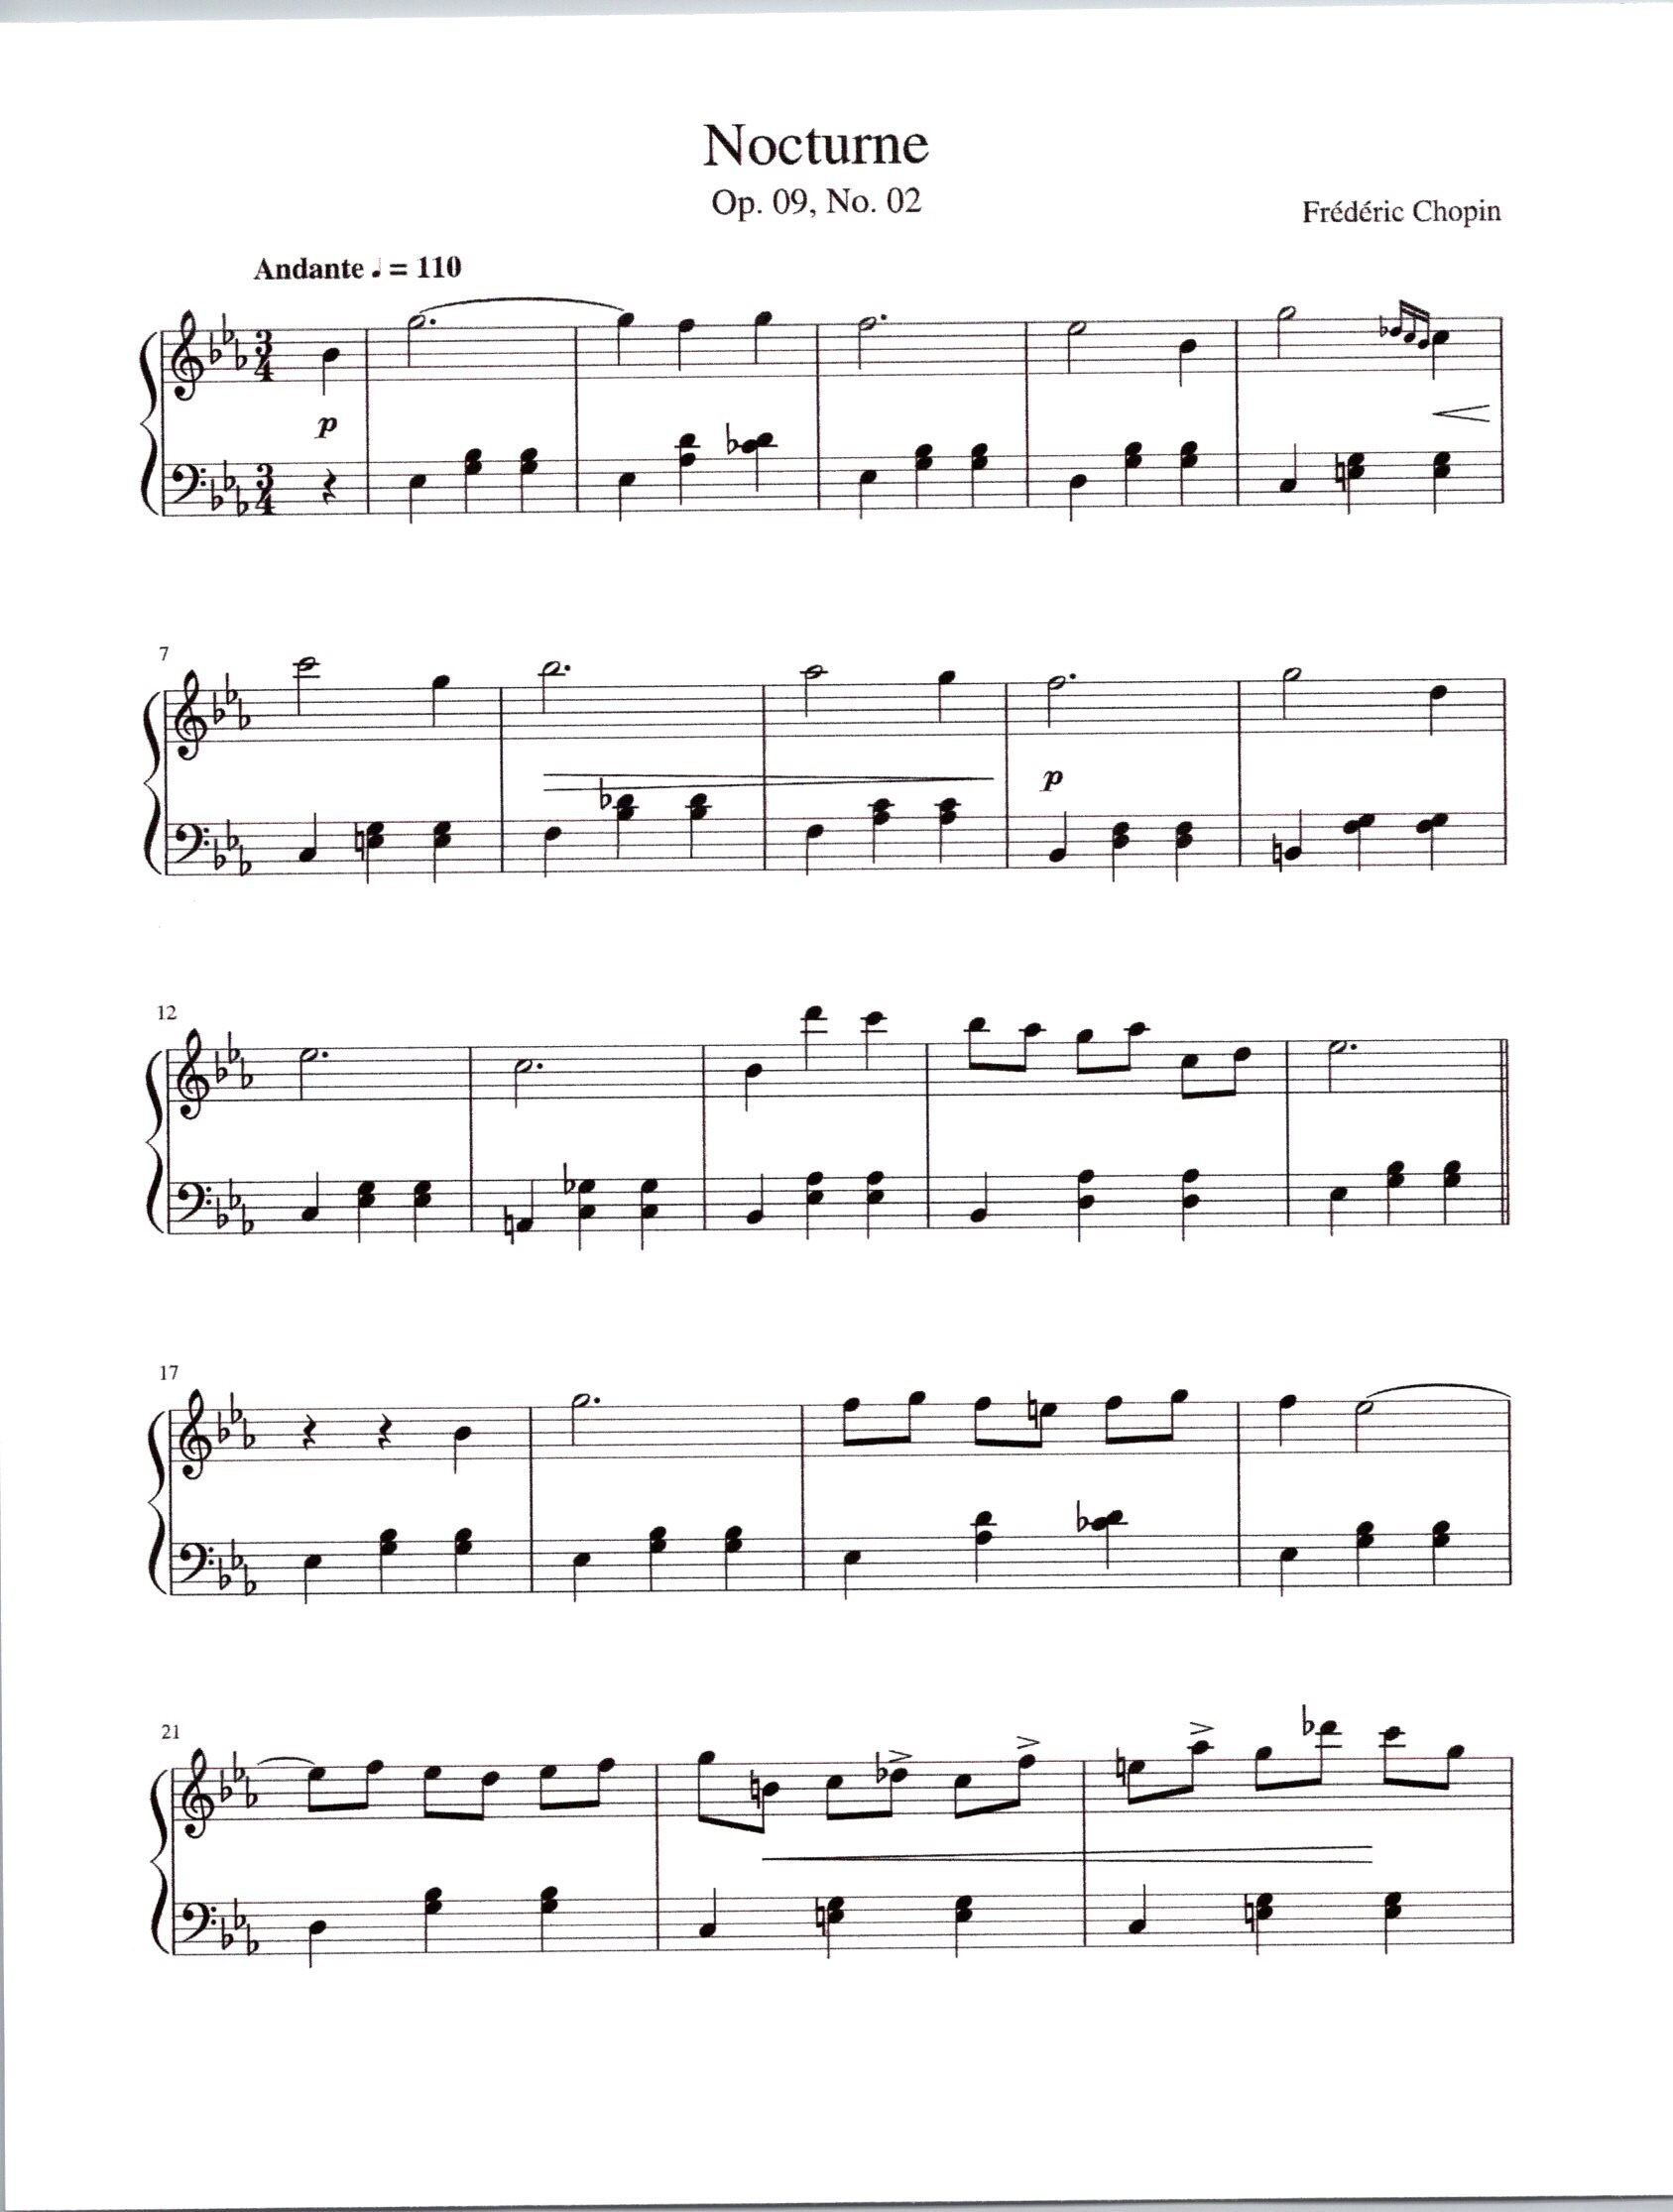 Traditional Shaker Song Simple Gifts Sheet Music in C Major